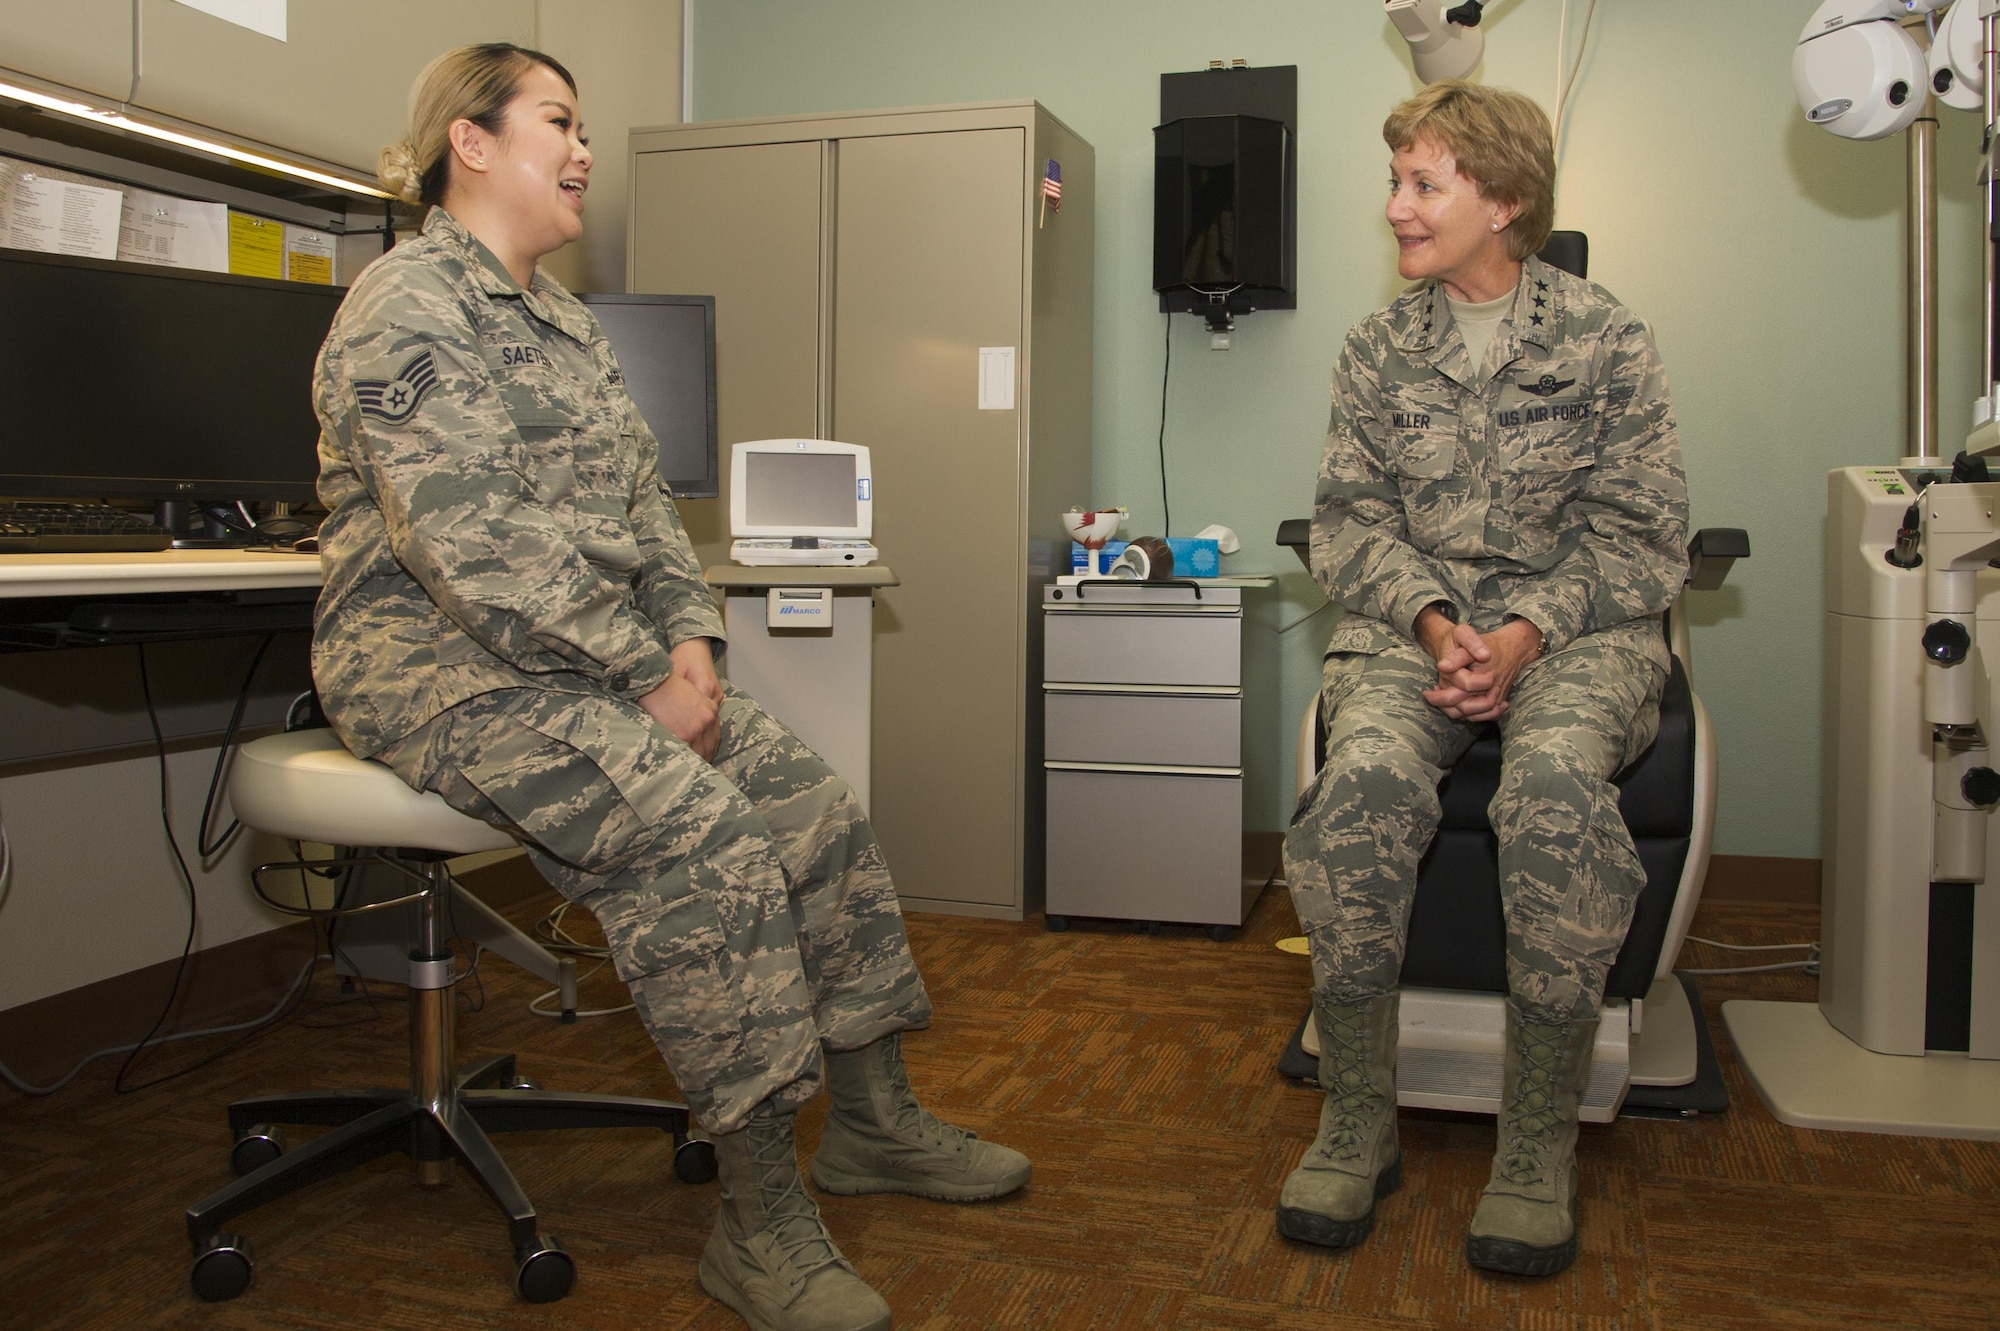 Staff Sgt. Cathy Saetern, 940th Aerospace Medicine Squadron medical technician, speaks with Lt. Gen. Maryanne Miller, Air Force Reserve Command commander and Chief of the Air Force Reserve, July 15, 2017, at Beale Air Force Base, California. Saetern was one of the reservists recognized by her unit and given the opportunity to meet with Miller and tell her about what she does in her unit. (U.S. Air Force photo by Senior Airman Tara R. Abrahams)